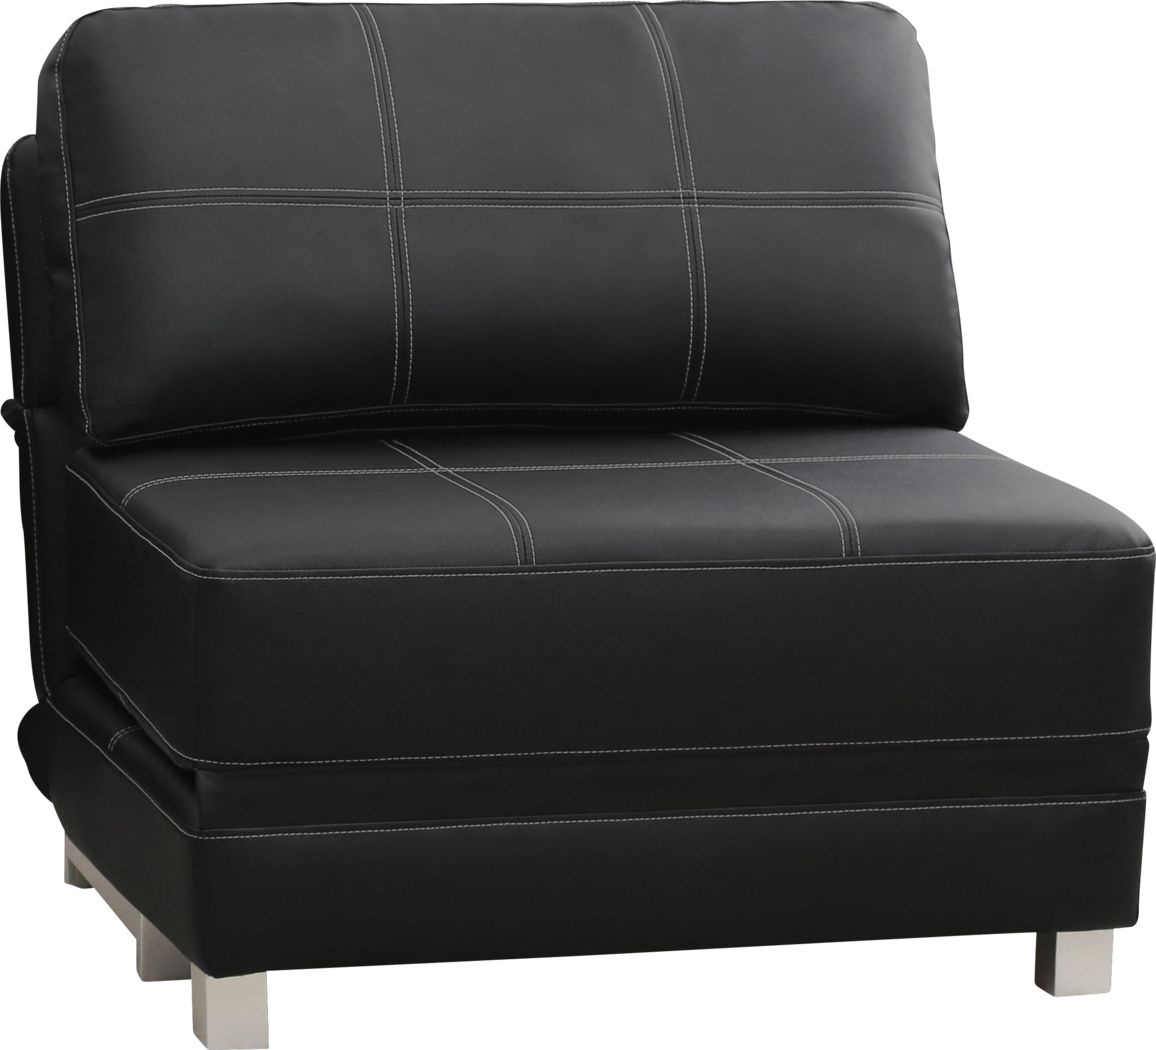 Futons Convertible Sofas For Sale